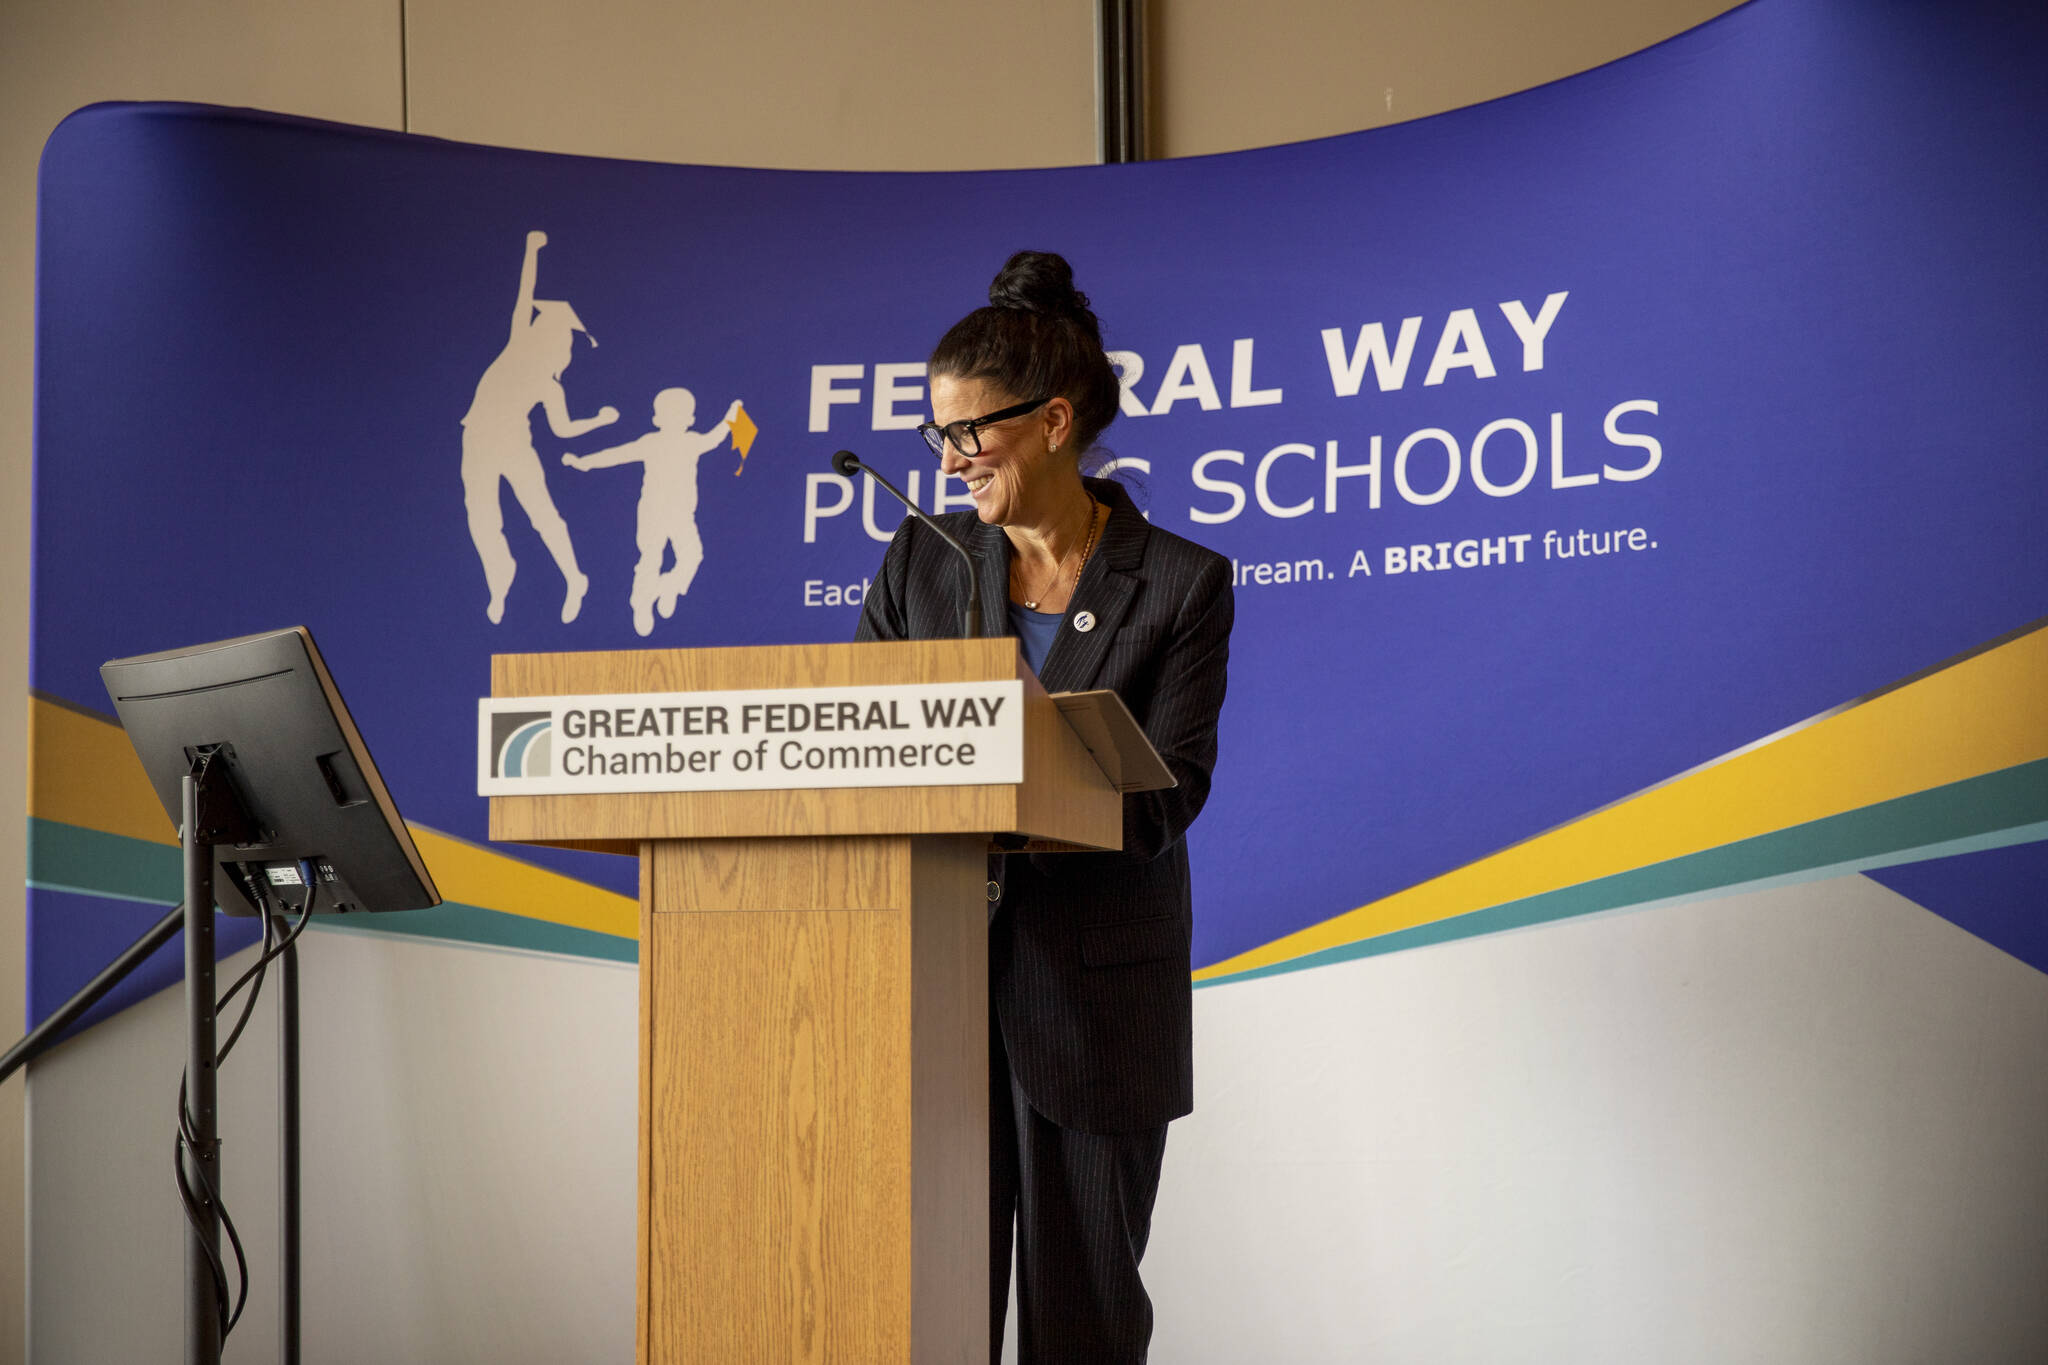 Dr. Dani Pfeiffer speaks to a full house at the Greater Federal Way Chamber of Commerce luncheon at the Federal Way Performing Arts and Event Center on Nov. 2. Photo courtesy of Federal Way Public Schools